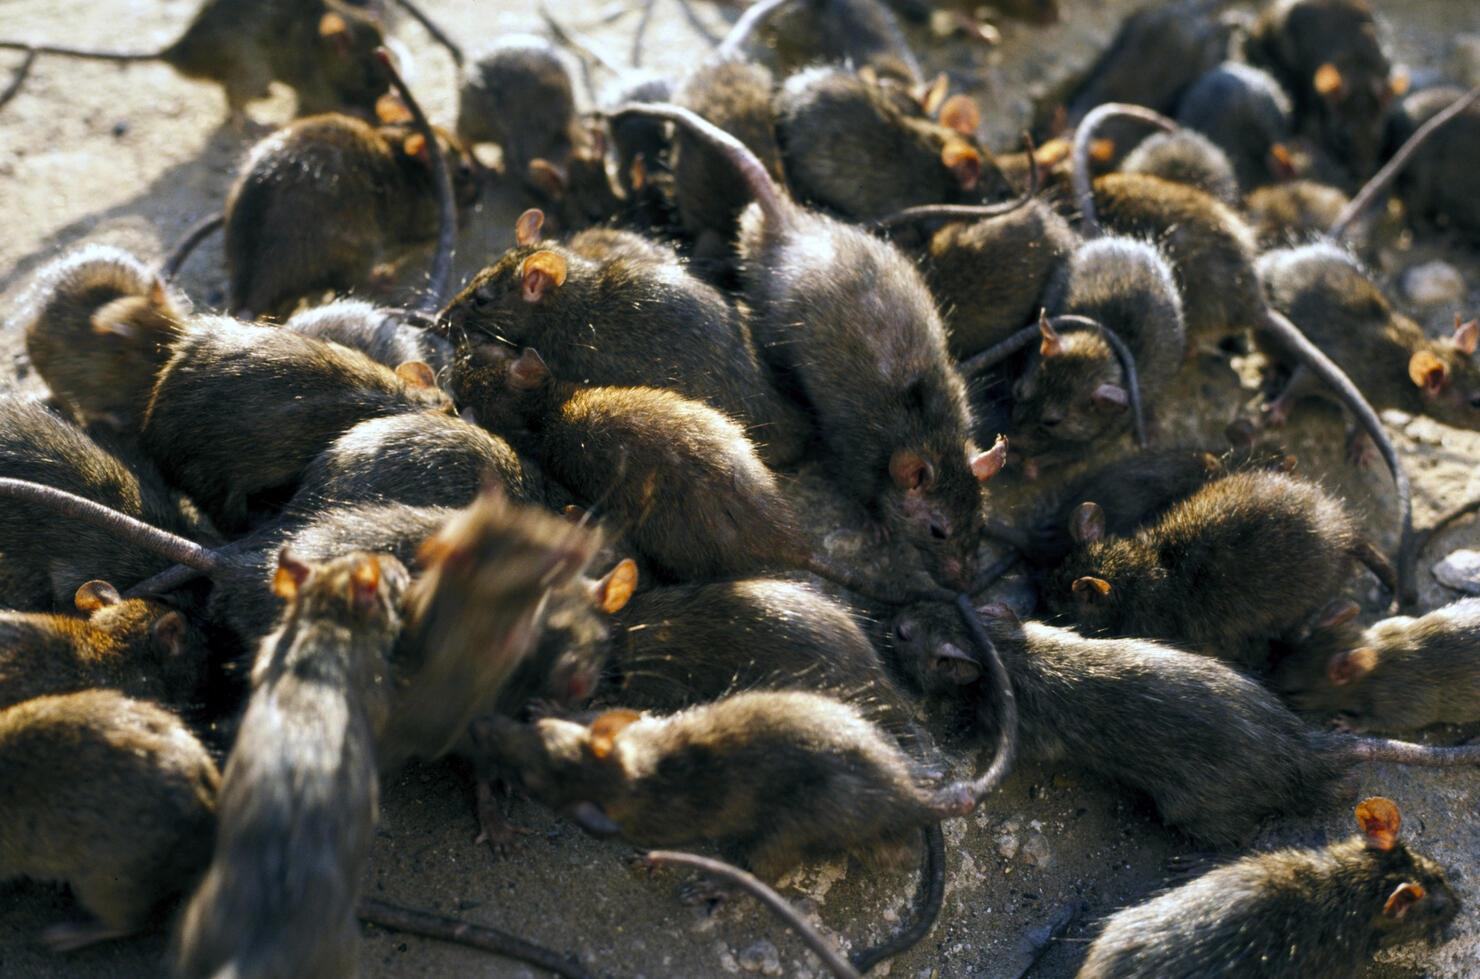 See Where Chicago Ranks On List Of The 'Rattiest Cities In The US' For